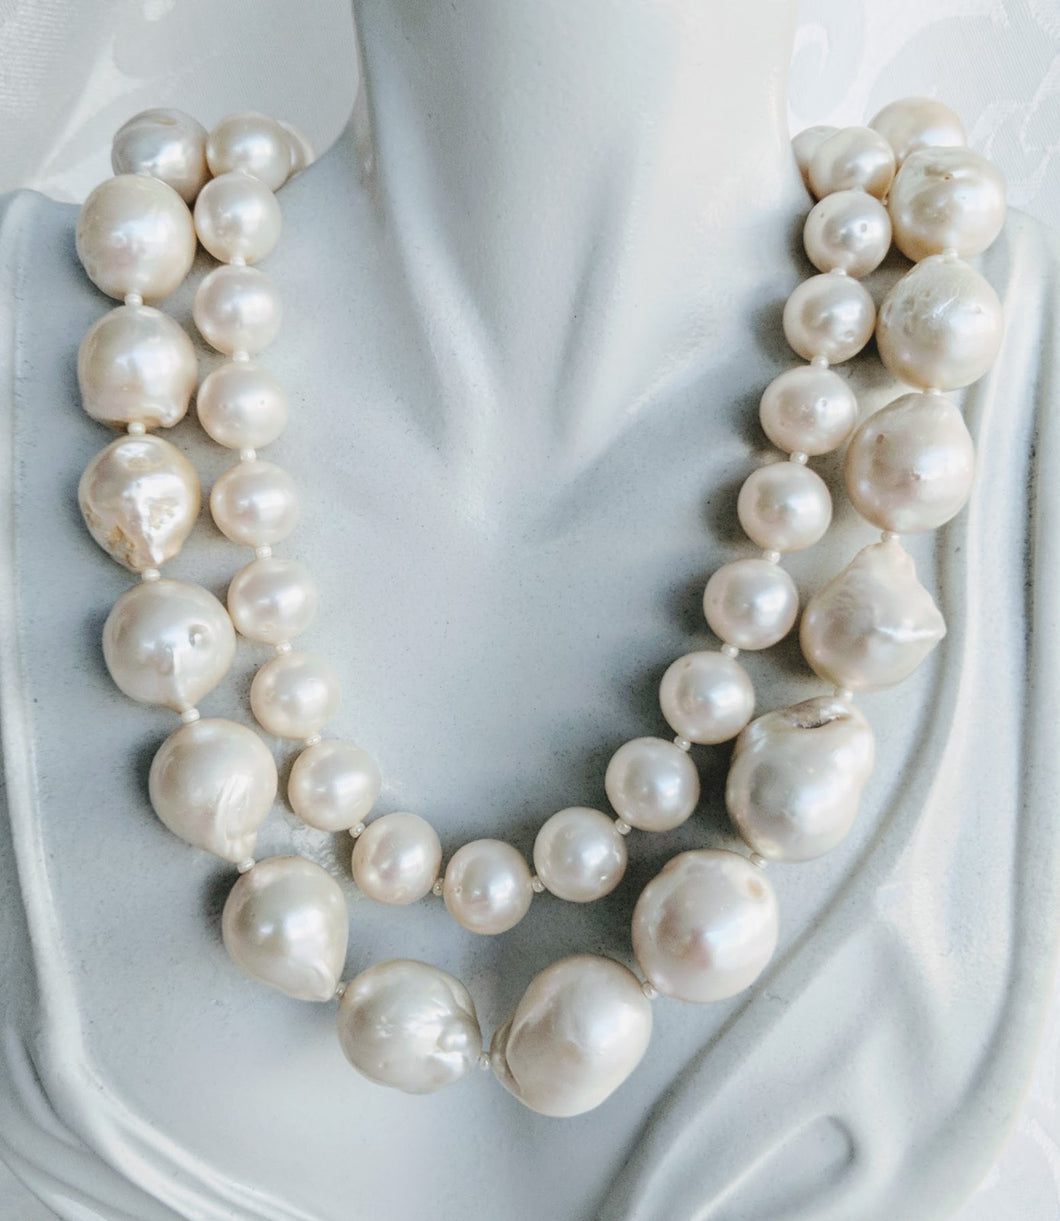 Two-strand pearl necklace with diamond clasp - Stittgen Fine Jewelry |  Exceptional designs handcrafted by Vancouver's best goldsmiths